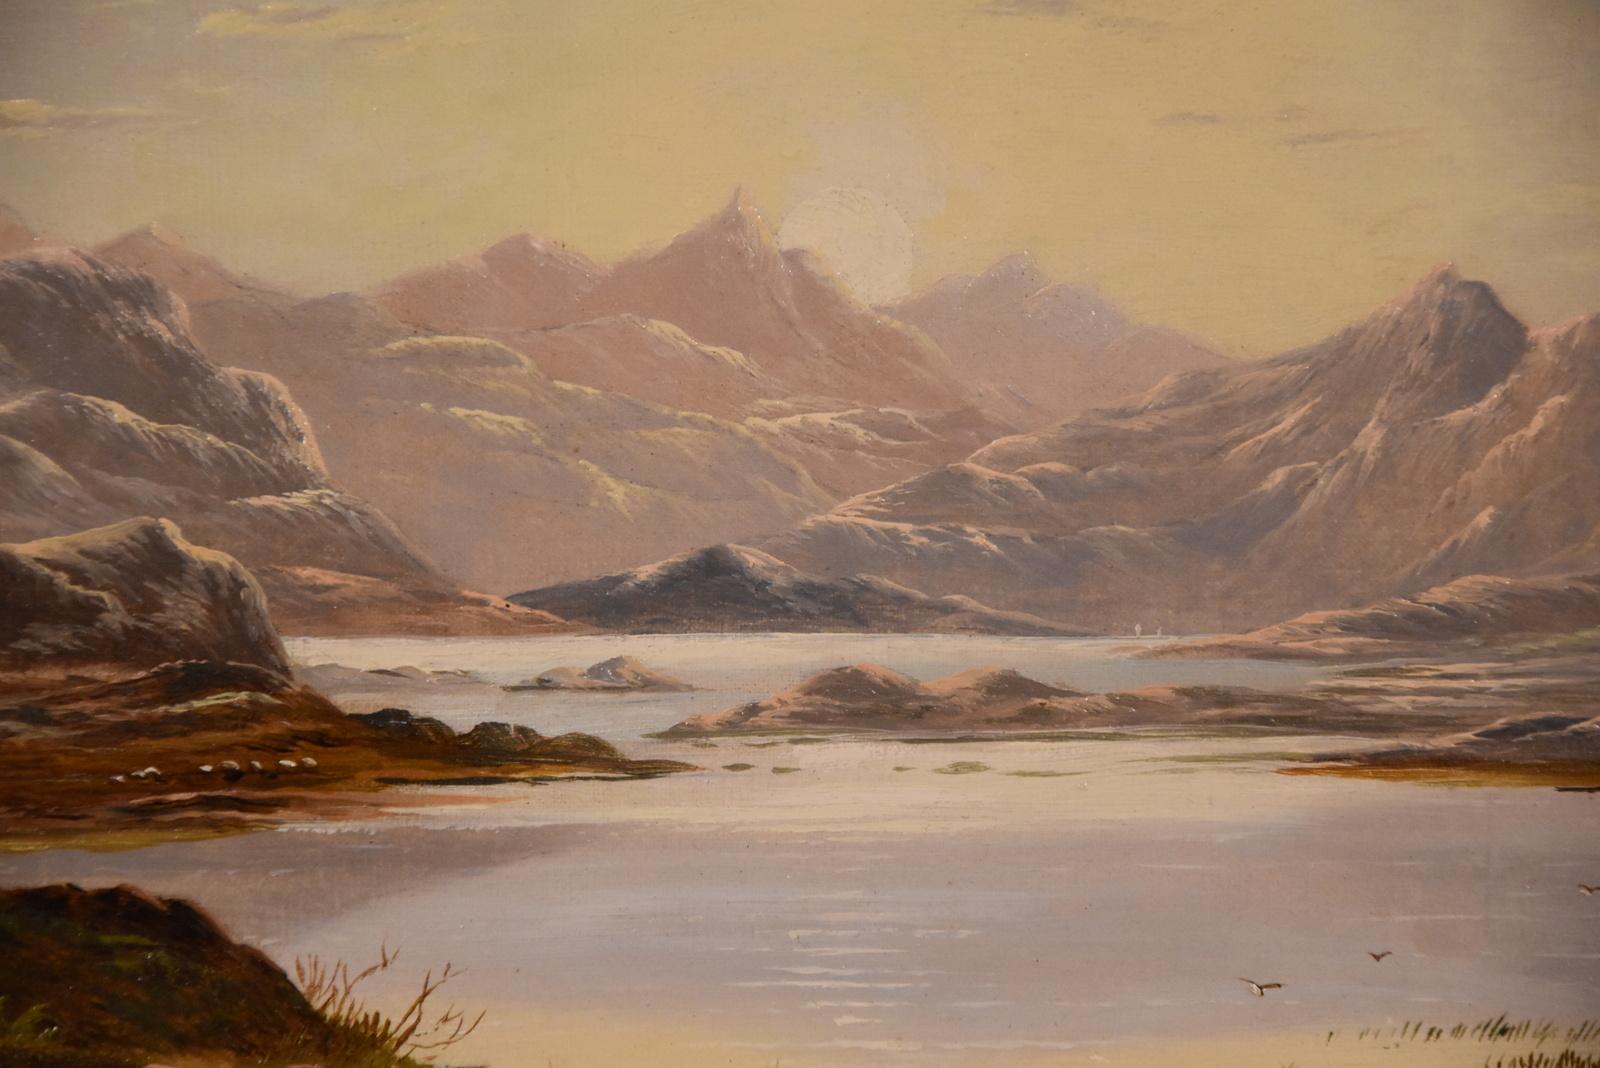 Oil painting Pair by Charles Leslie “Mountain Landscapes”.  Charles Leslie 1835-1890 A popular painter of Highland landscapes, he exhibited at the Royal Academy, Royal Society. Both oil on canvas. Signed and dated 1876 “North Britain”

Dimensions